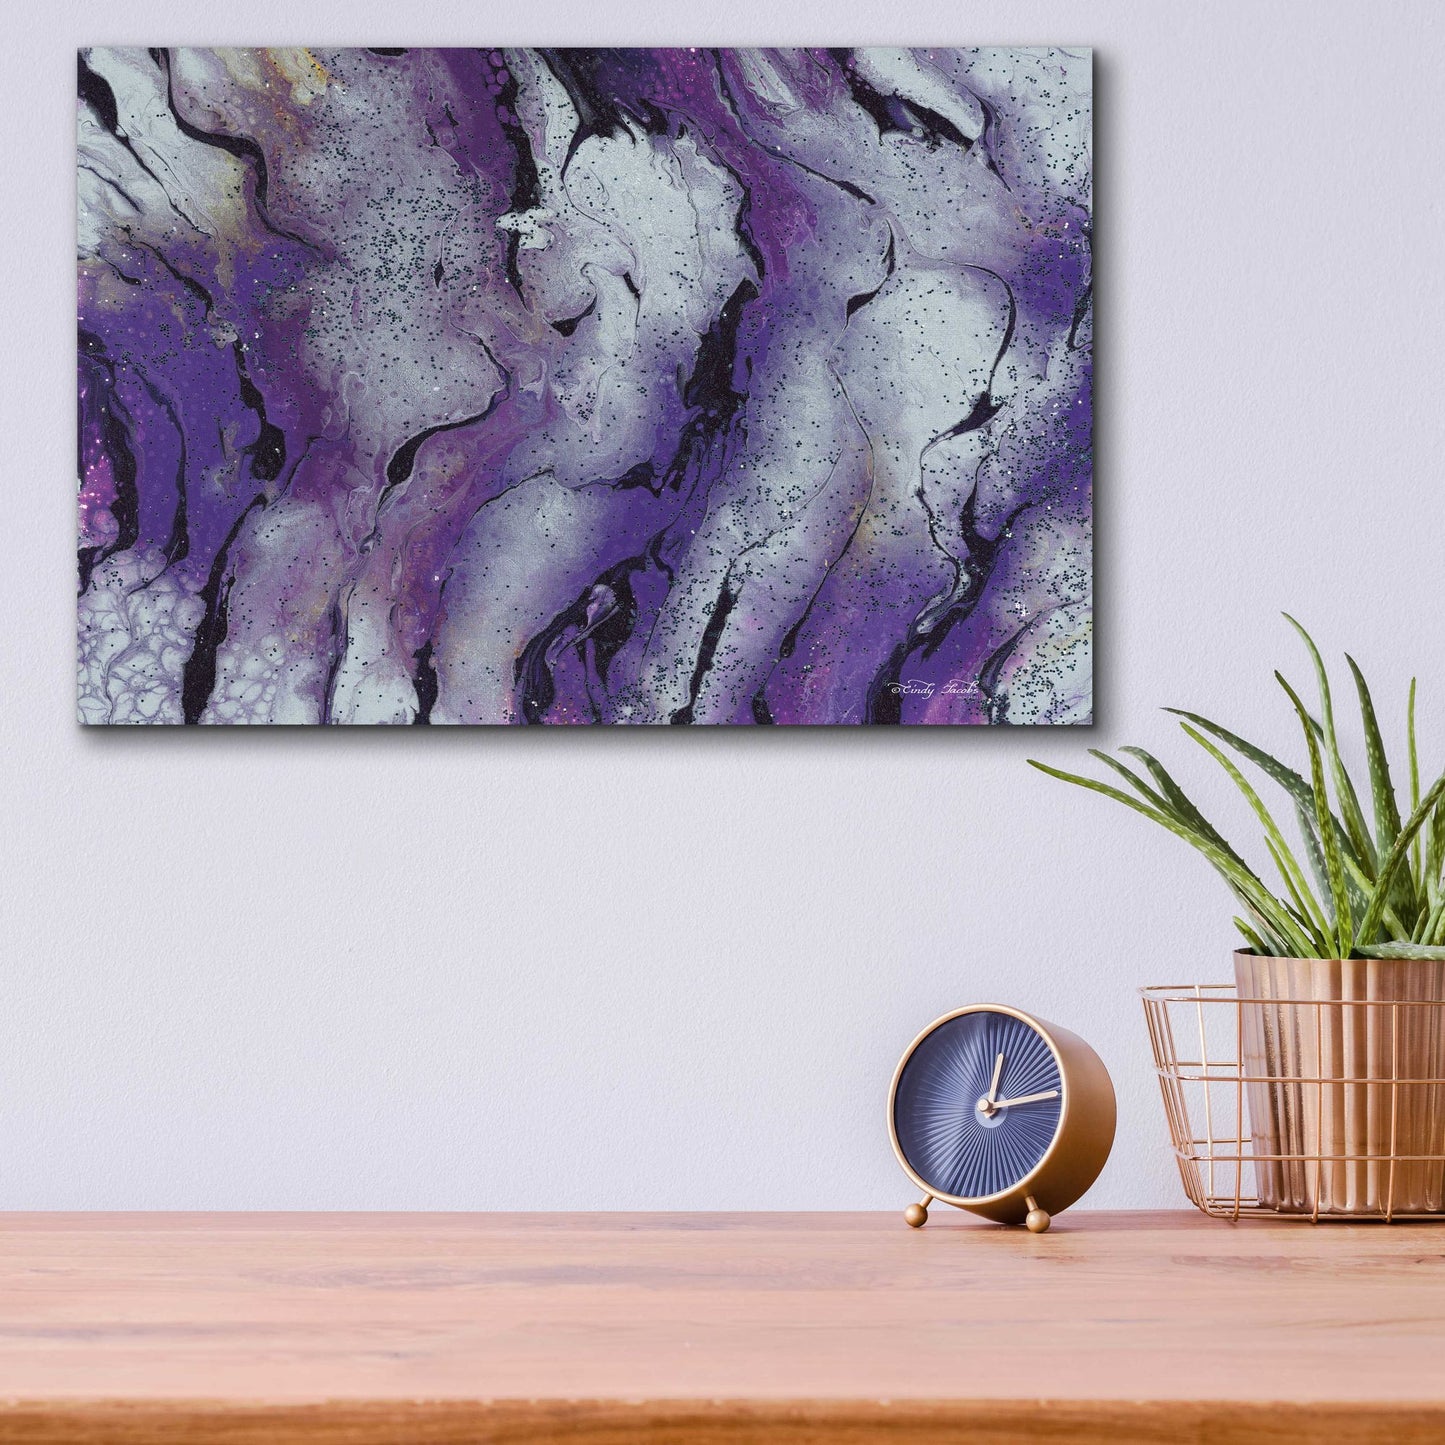 Epic Art 'Abstract in Purple III' by Cindy Jacobs, Acrylic Glass Wall Art,16x12